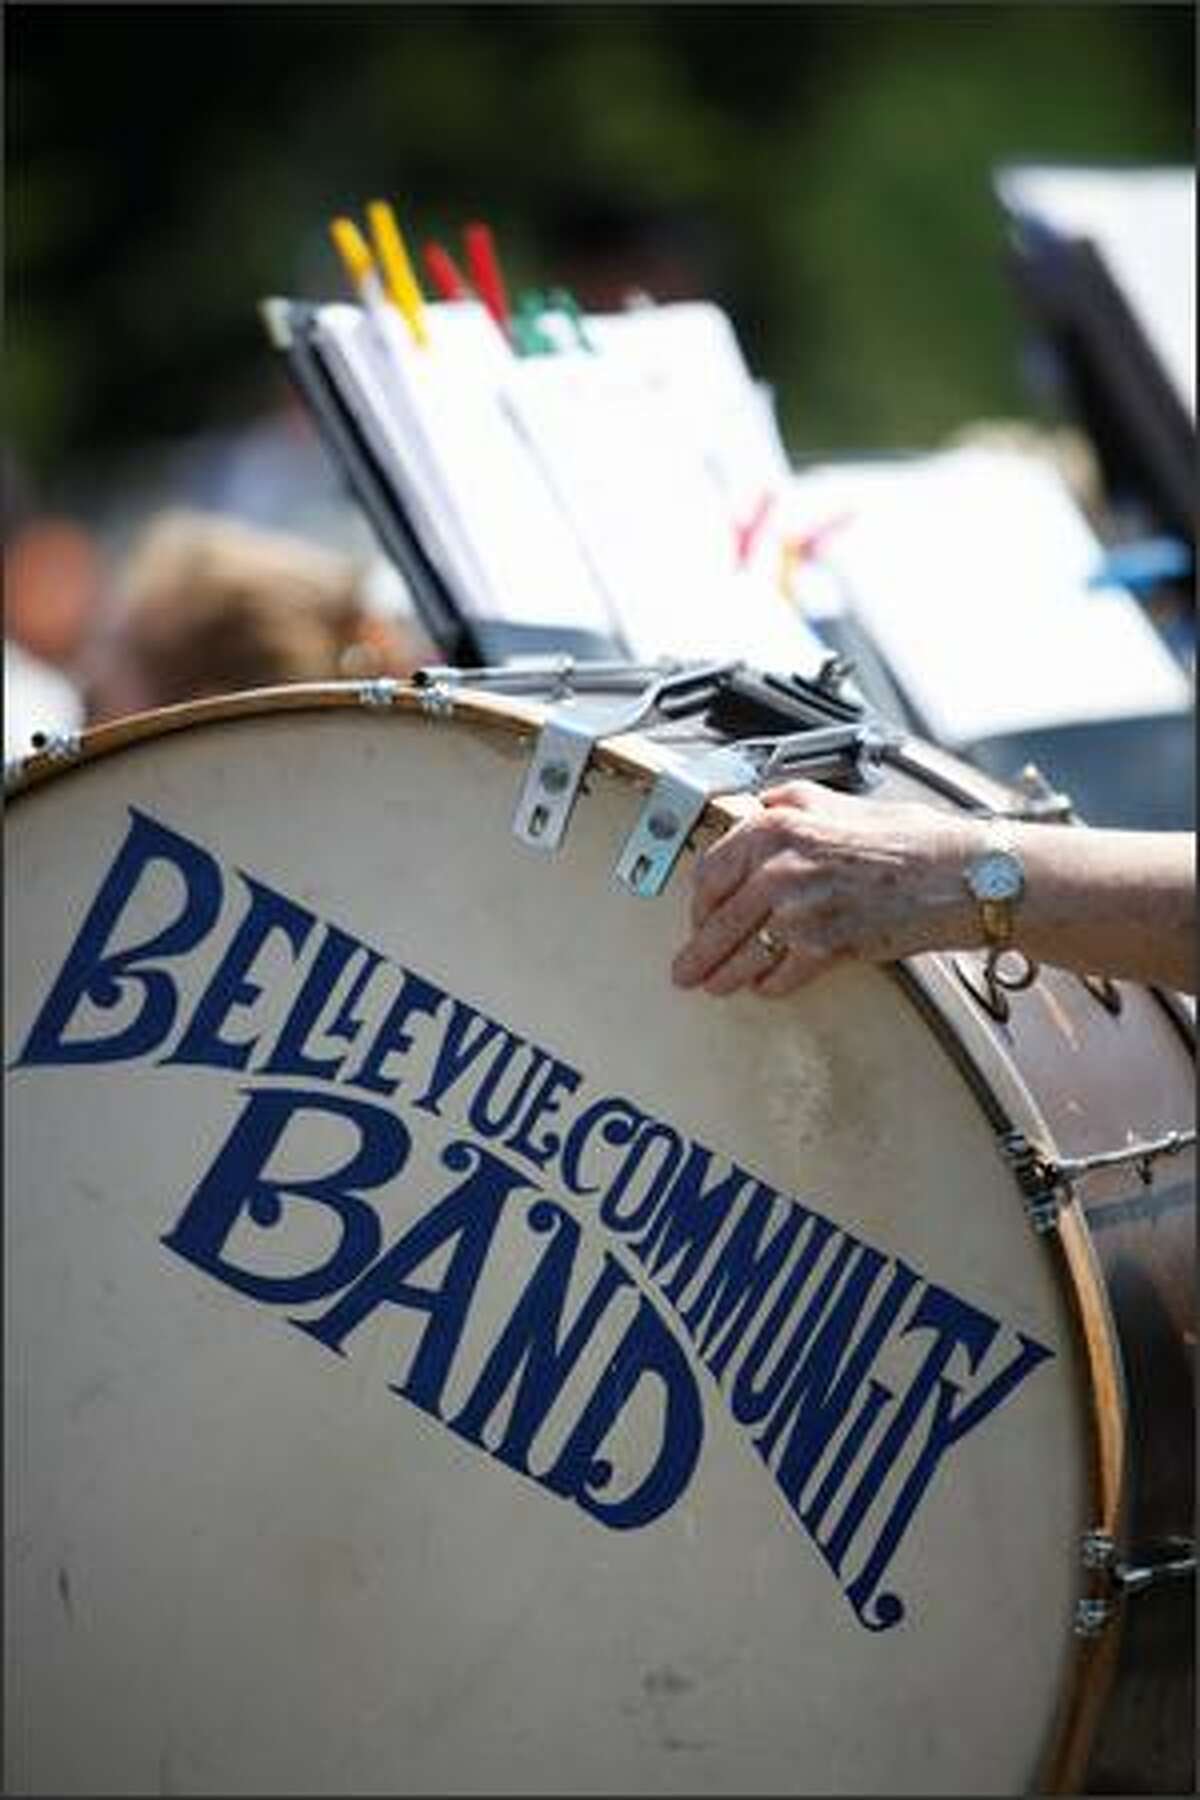 The Bellevue Community Band performs during the Memorial Day celebration Monday at Tahoma National Cemetery in Kent.